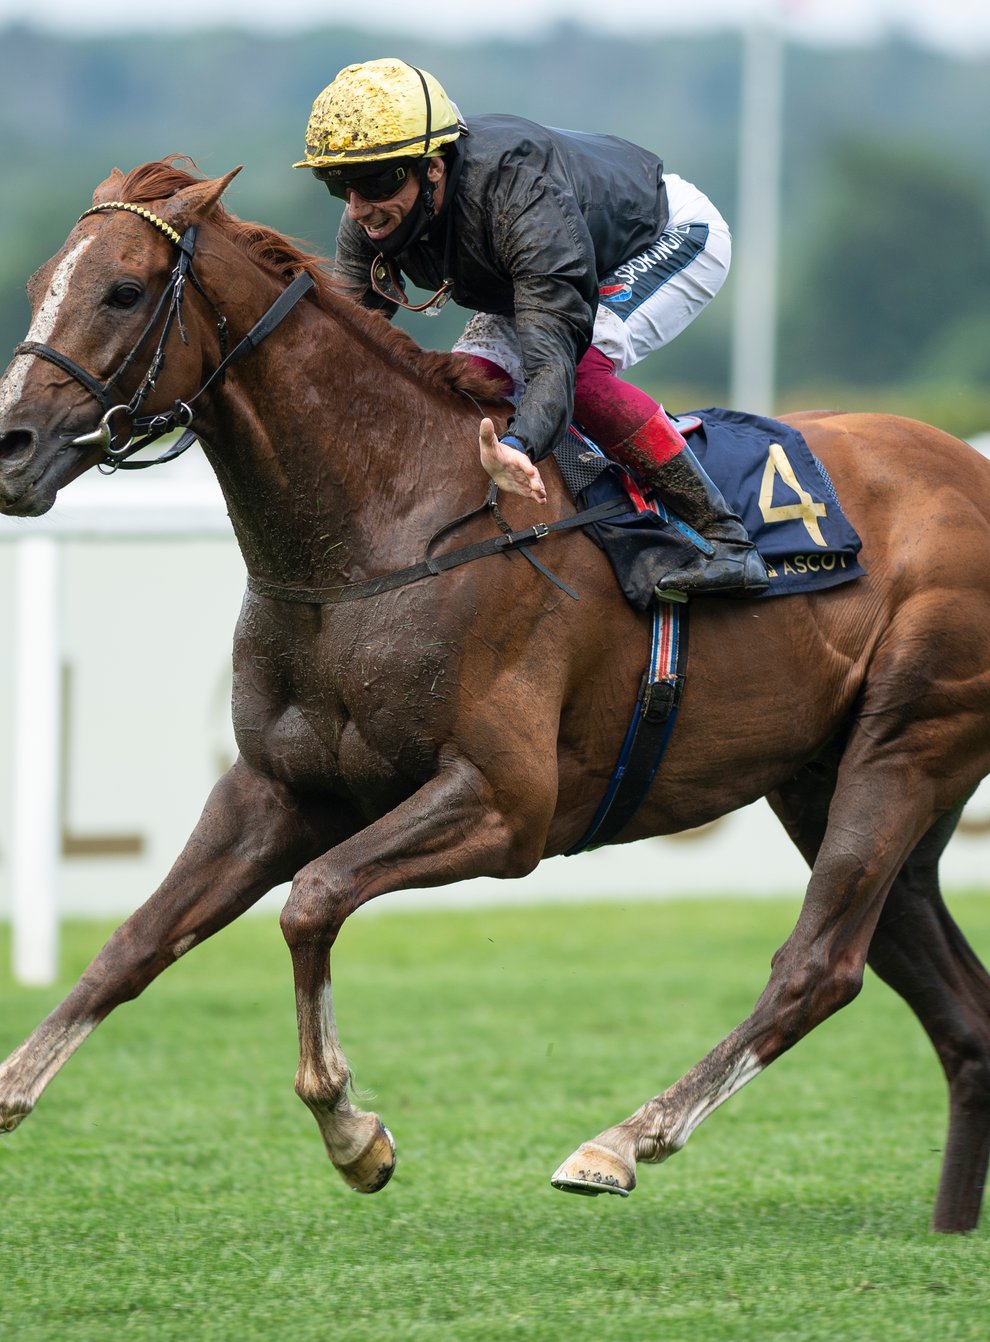 Stradivarius goes for a fourth Goodwood Cup next week